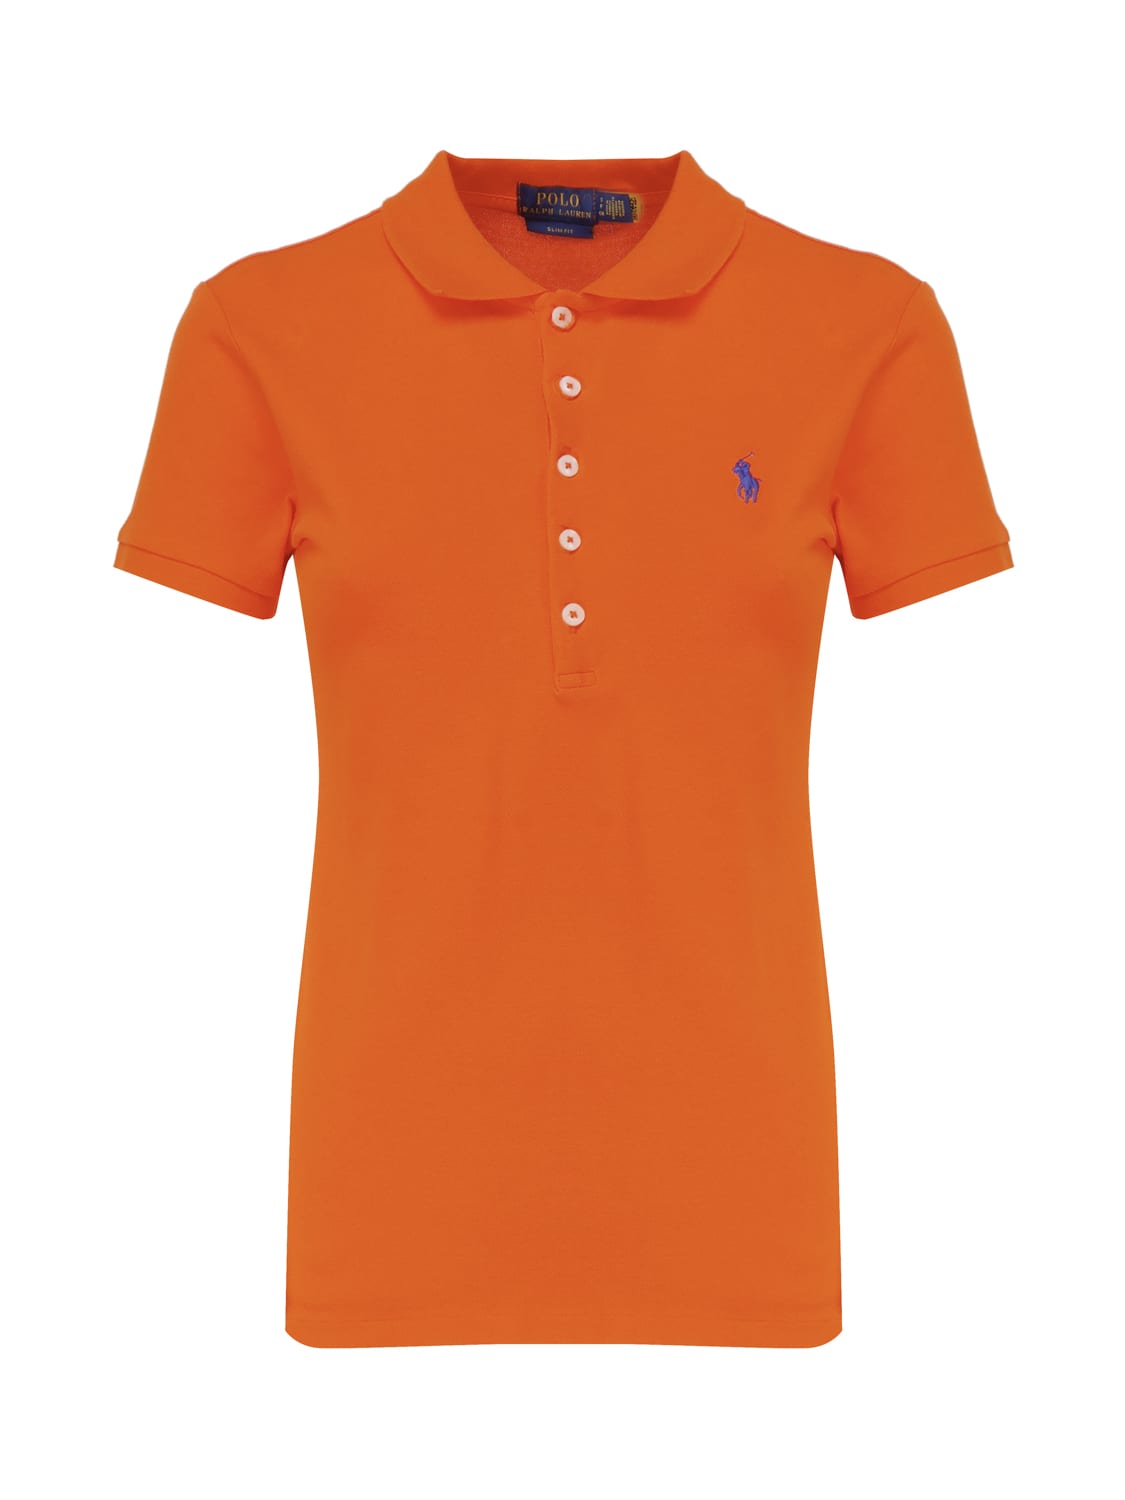 POLO RALPH LAUREN SLIM POLO SHIRT WITH EMBROIDERY